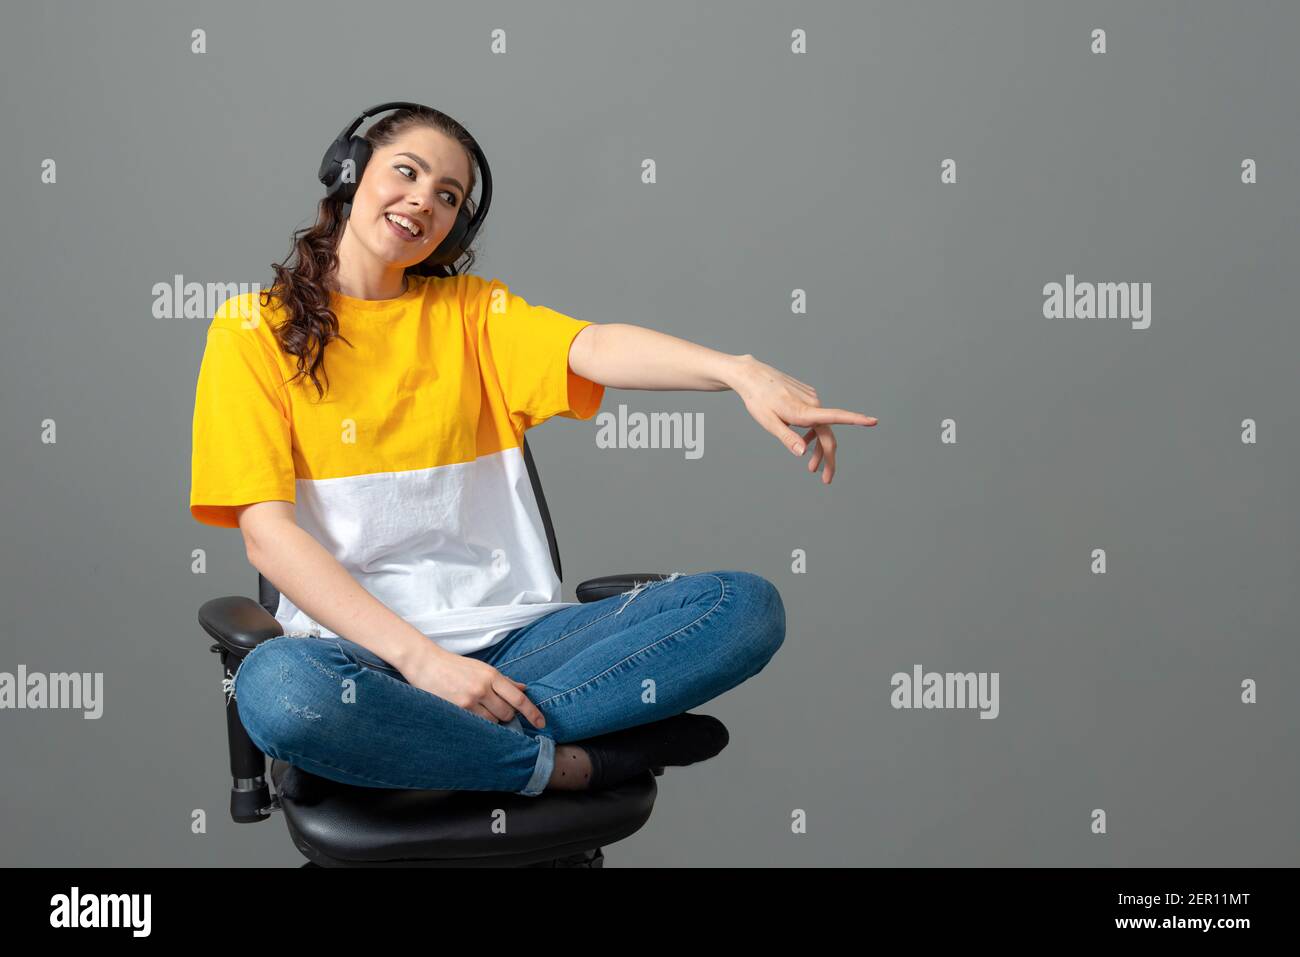 teenager with long wavy hair dressed in a yellow t-shirt sitting on an office chair and listening music, play games, listen to music, isolated on gray Stock Photo